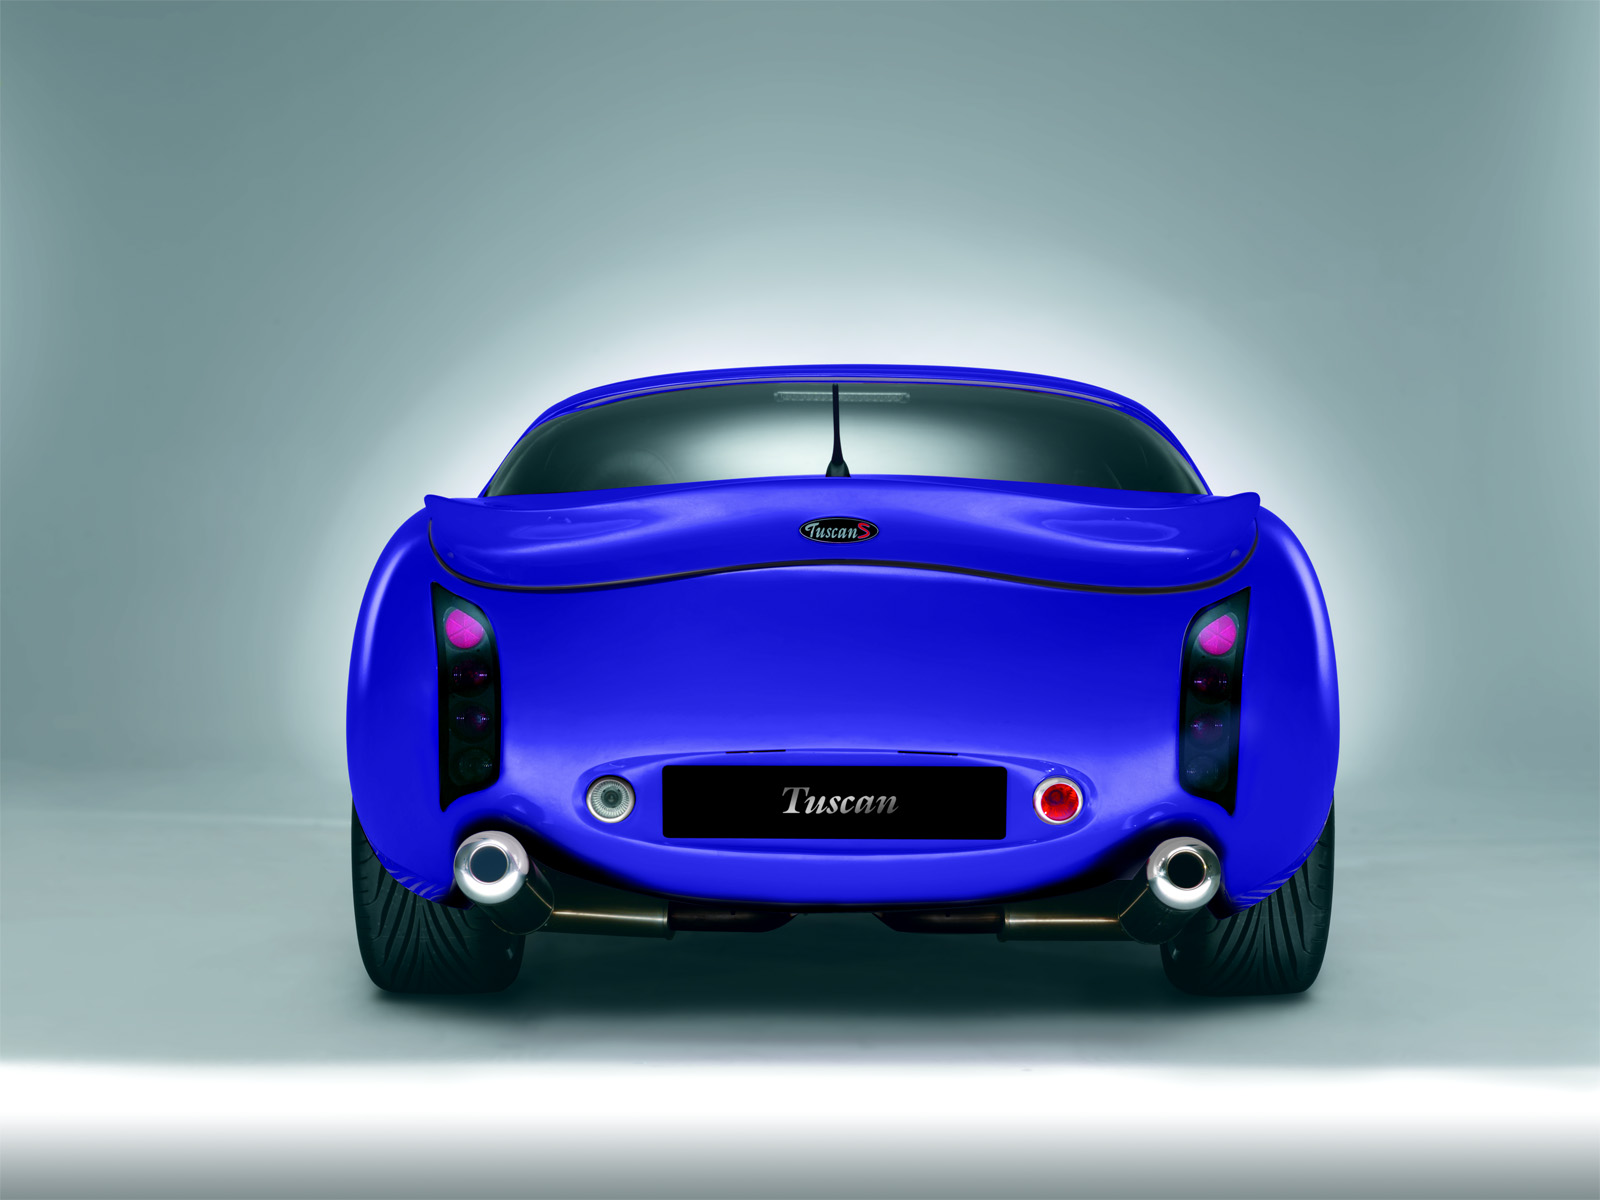 Tvr tuscan s